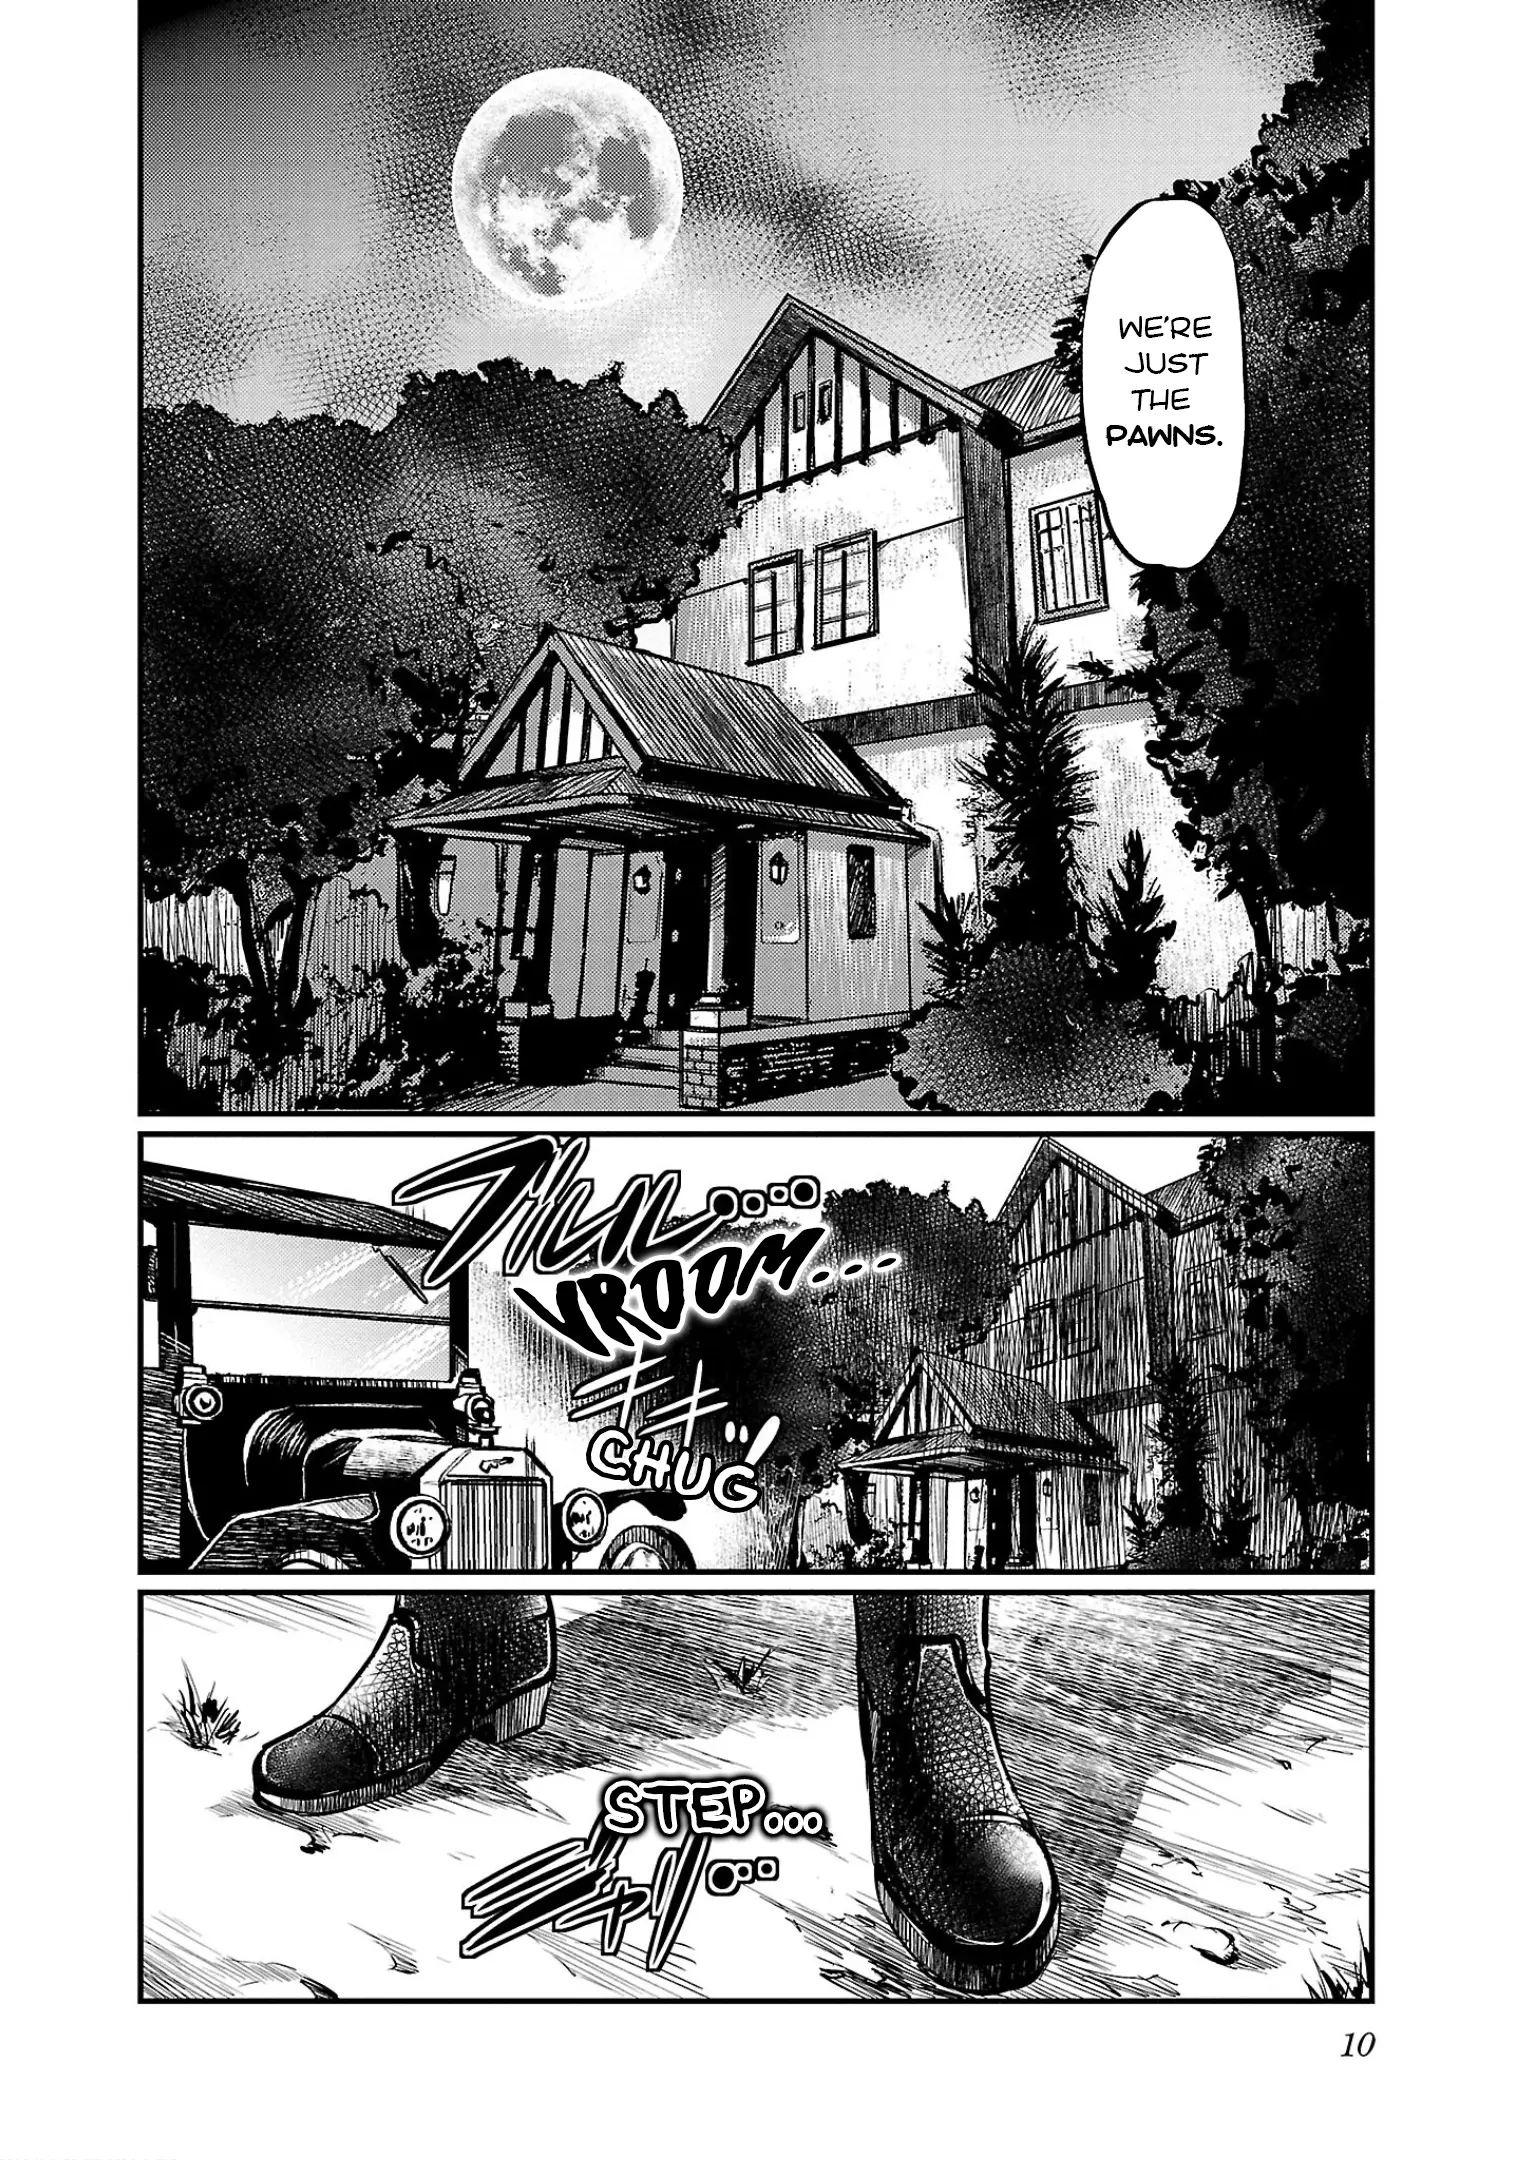 Golden Bat - A Mysterious Story Of The Taisho Era's Skull - 1 page 10-9d651bd9